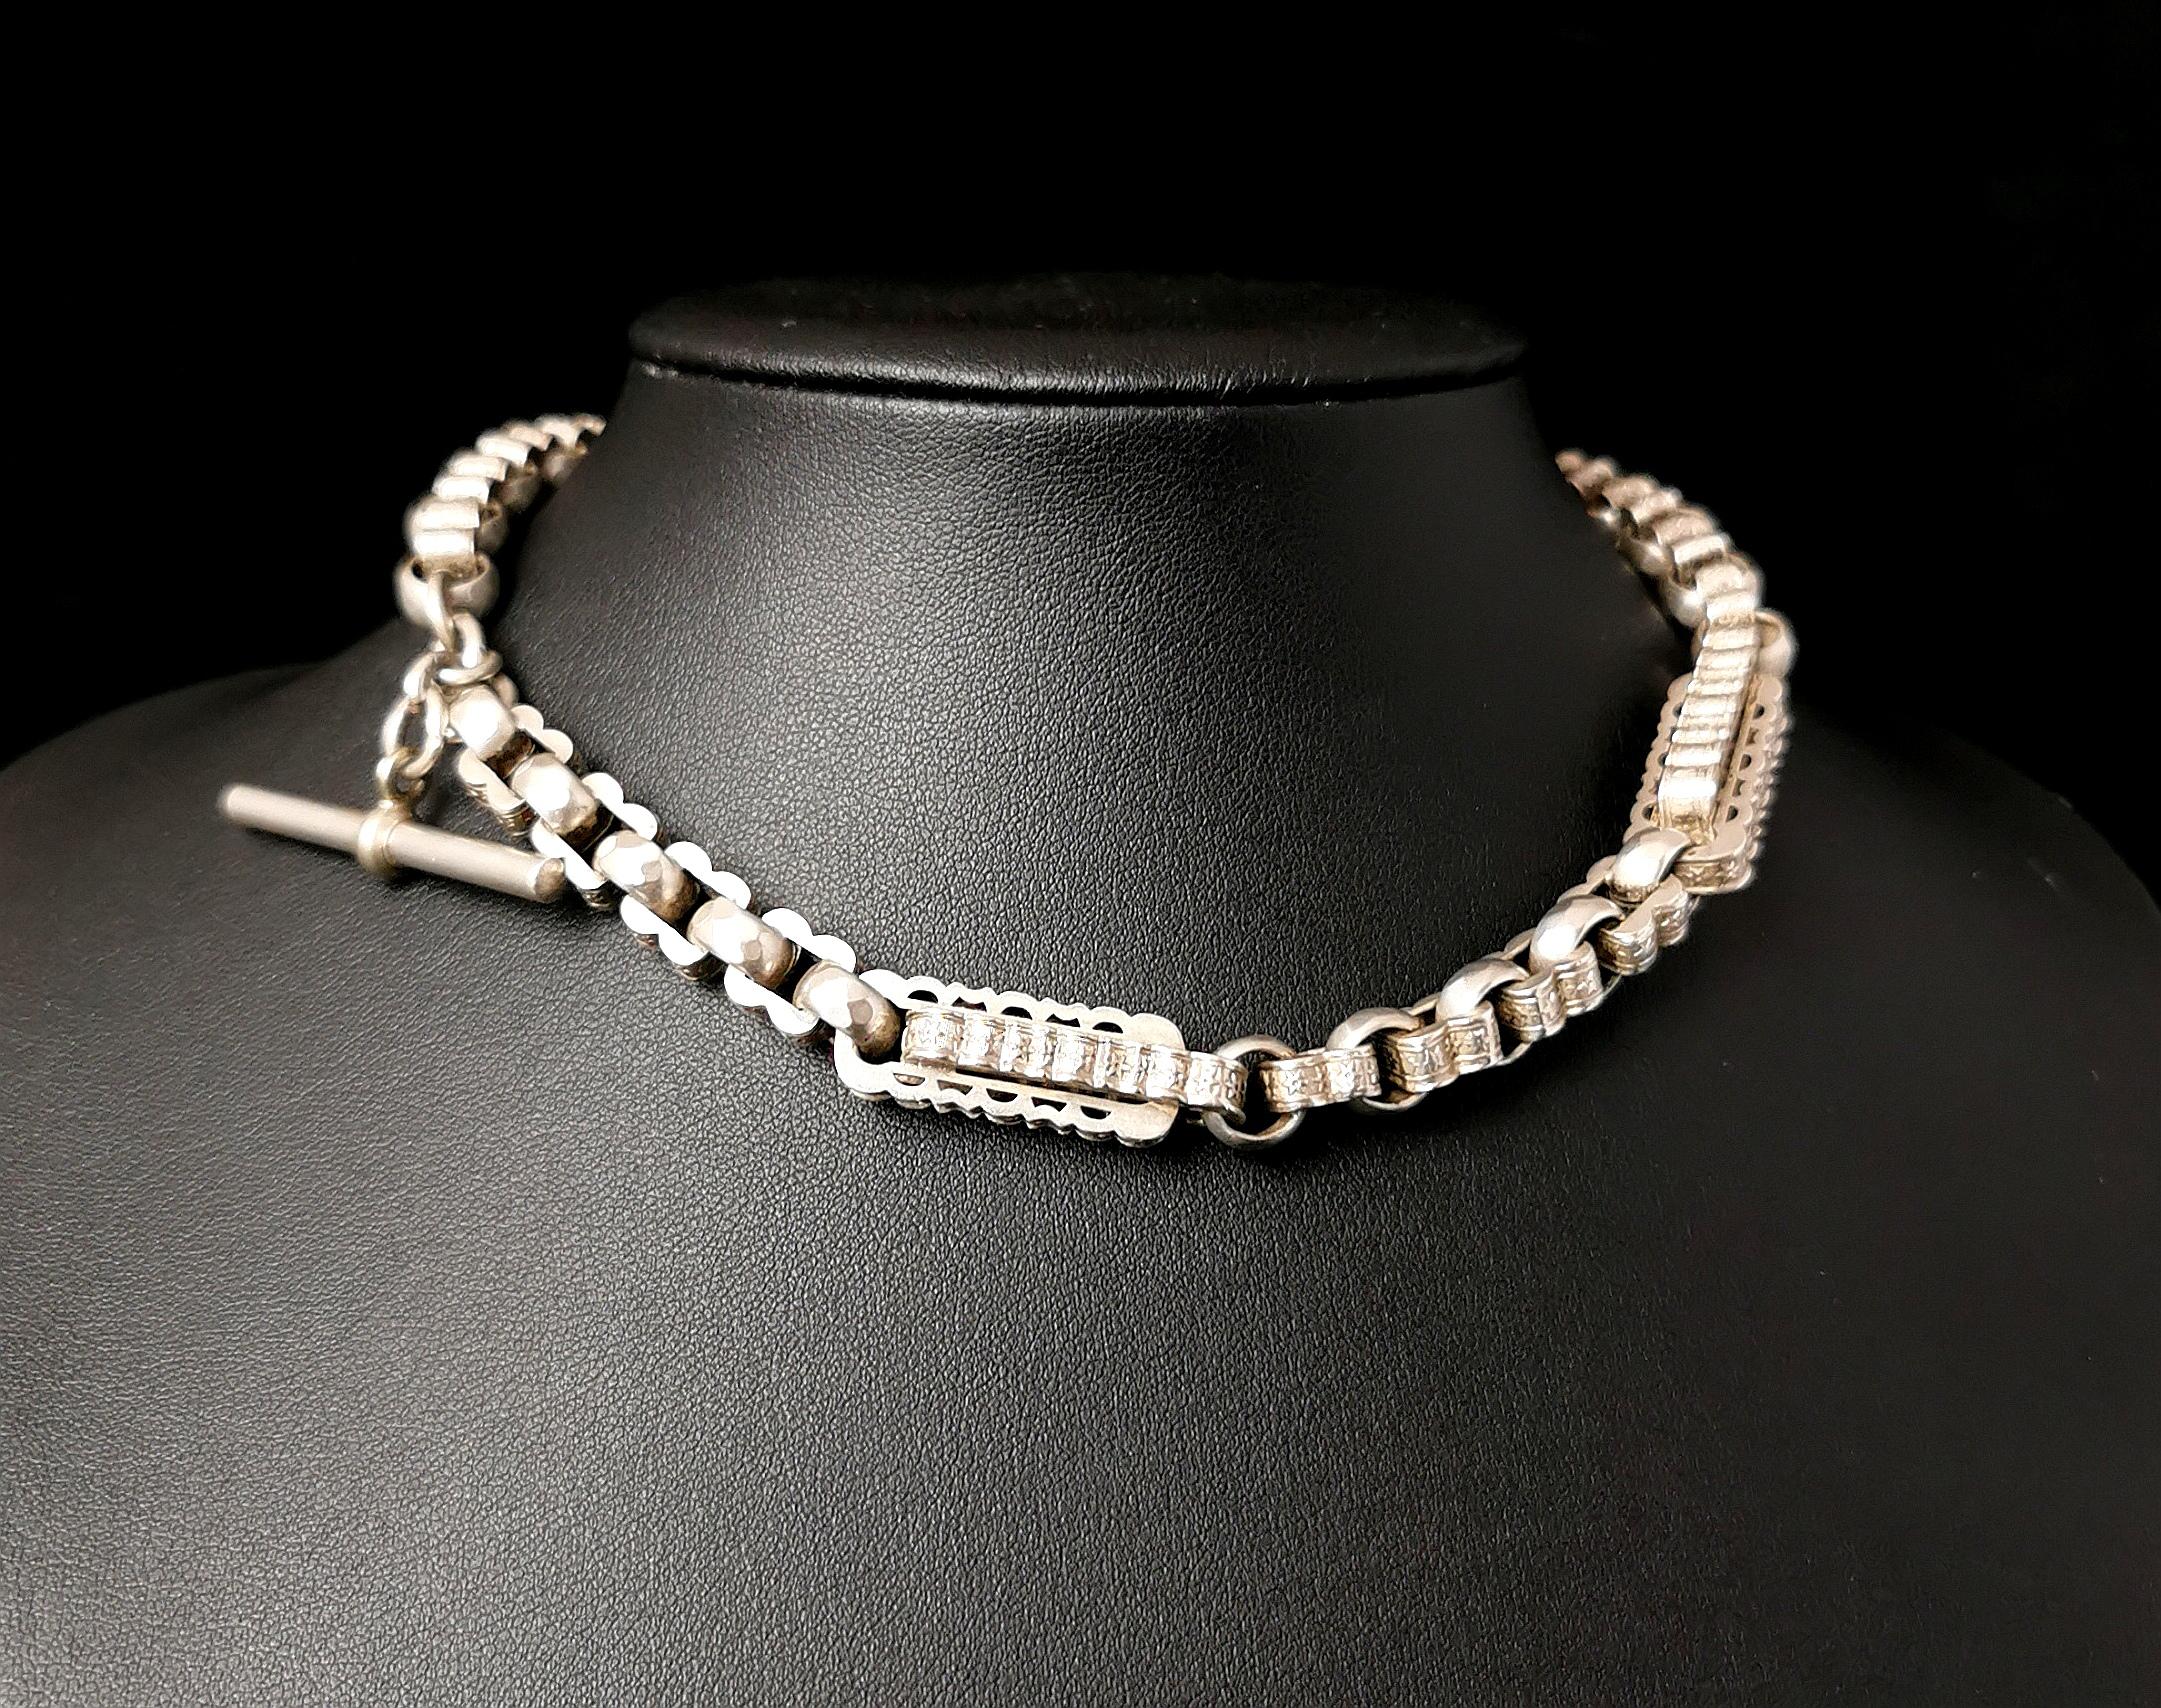 A heavy and chunky antique Victorian era, fancy link silver Albert chain.

Nice chunky engraved and embossed bar links intercepted with big faceted rolo links and further smaller embossed links.

The chain is made from sterling silver and is